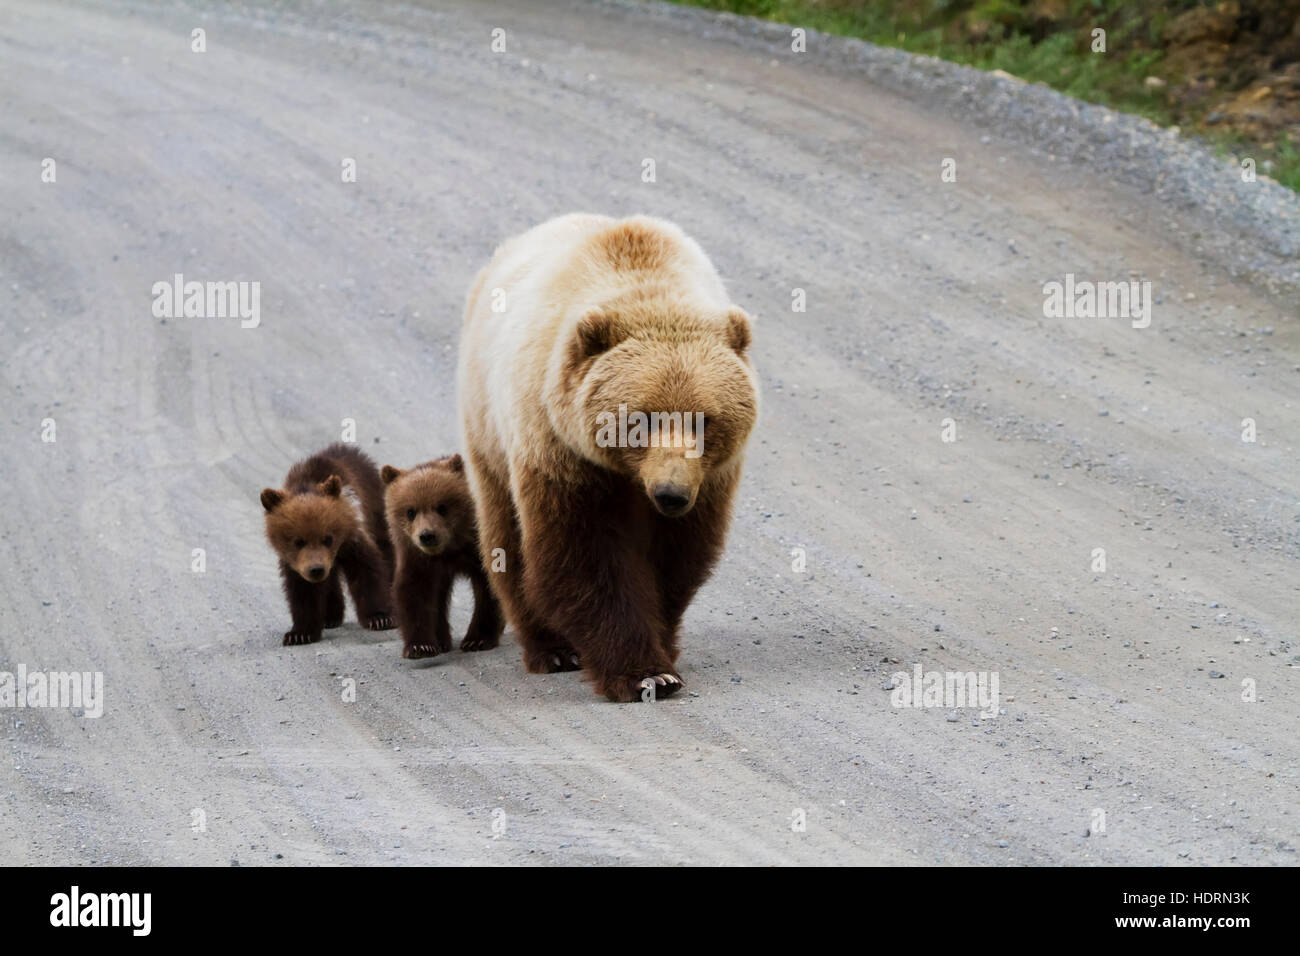 Grizzly Bears (Ursus Arctos Horribilis) Walking On The Park Road, Twin Cubs Did Not Venture Far From Their Mother's Protection, Denali National Par... Stock Photo